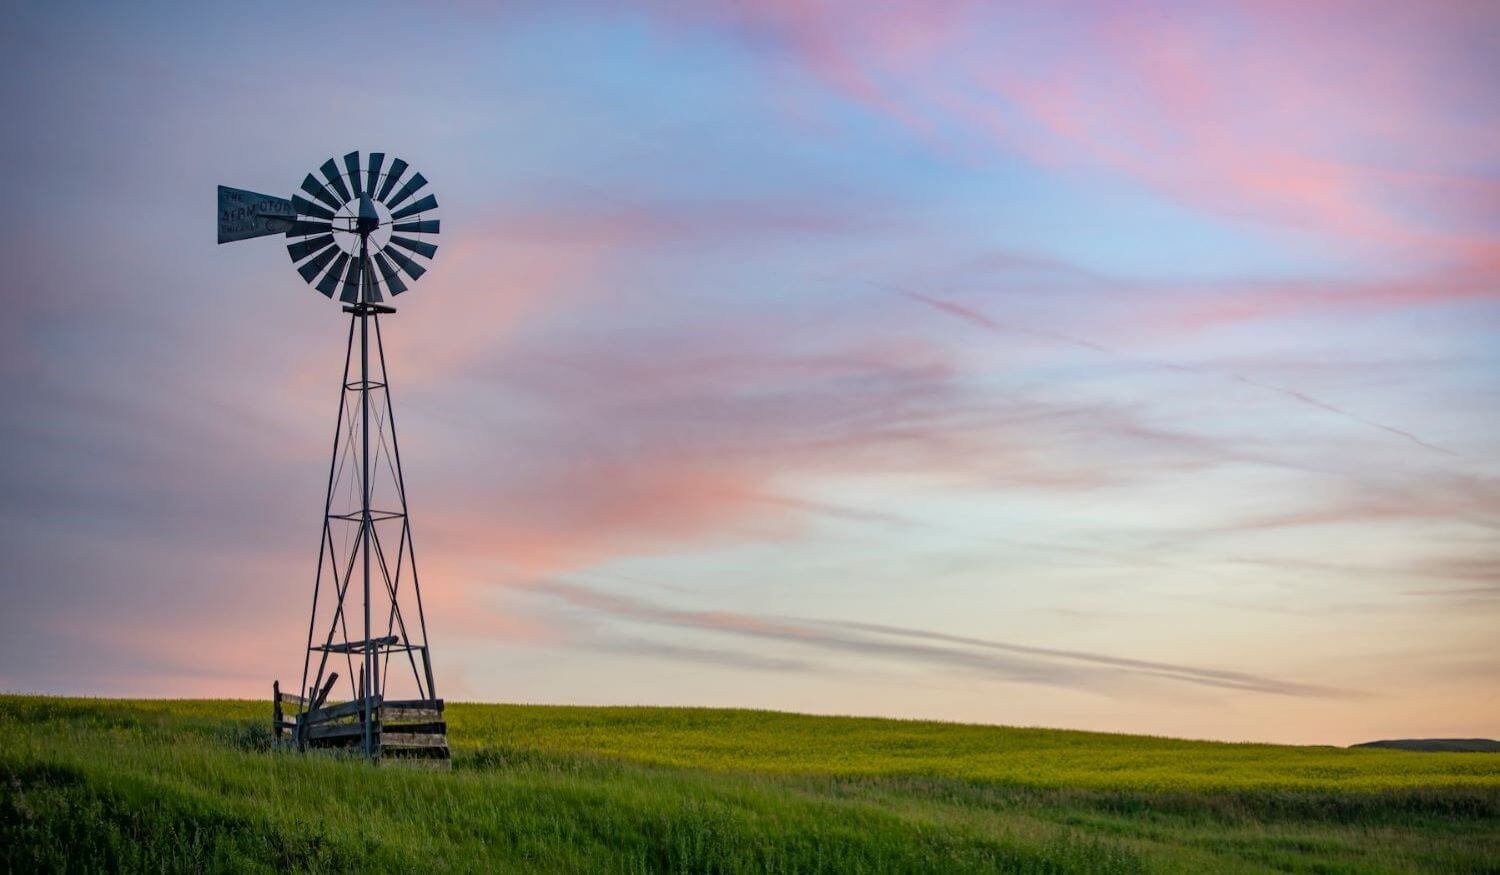 A windmill for livestock in a green pasture. Windmills can be a great metaphor for the winds of the spirit and the living water only God provides for our souls.